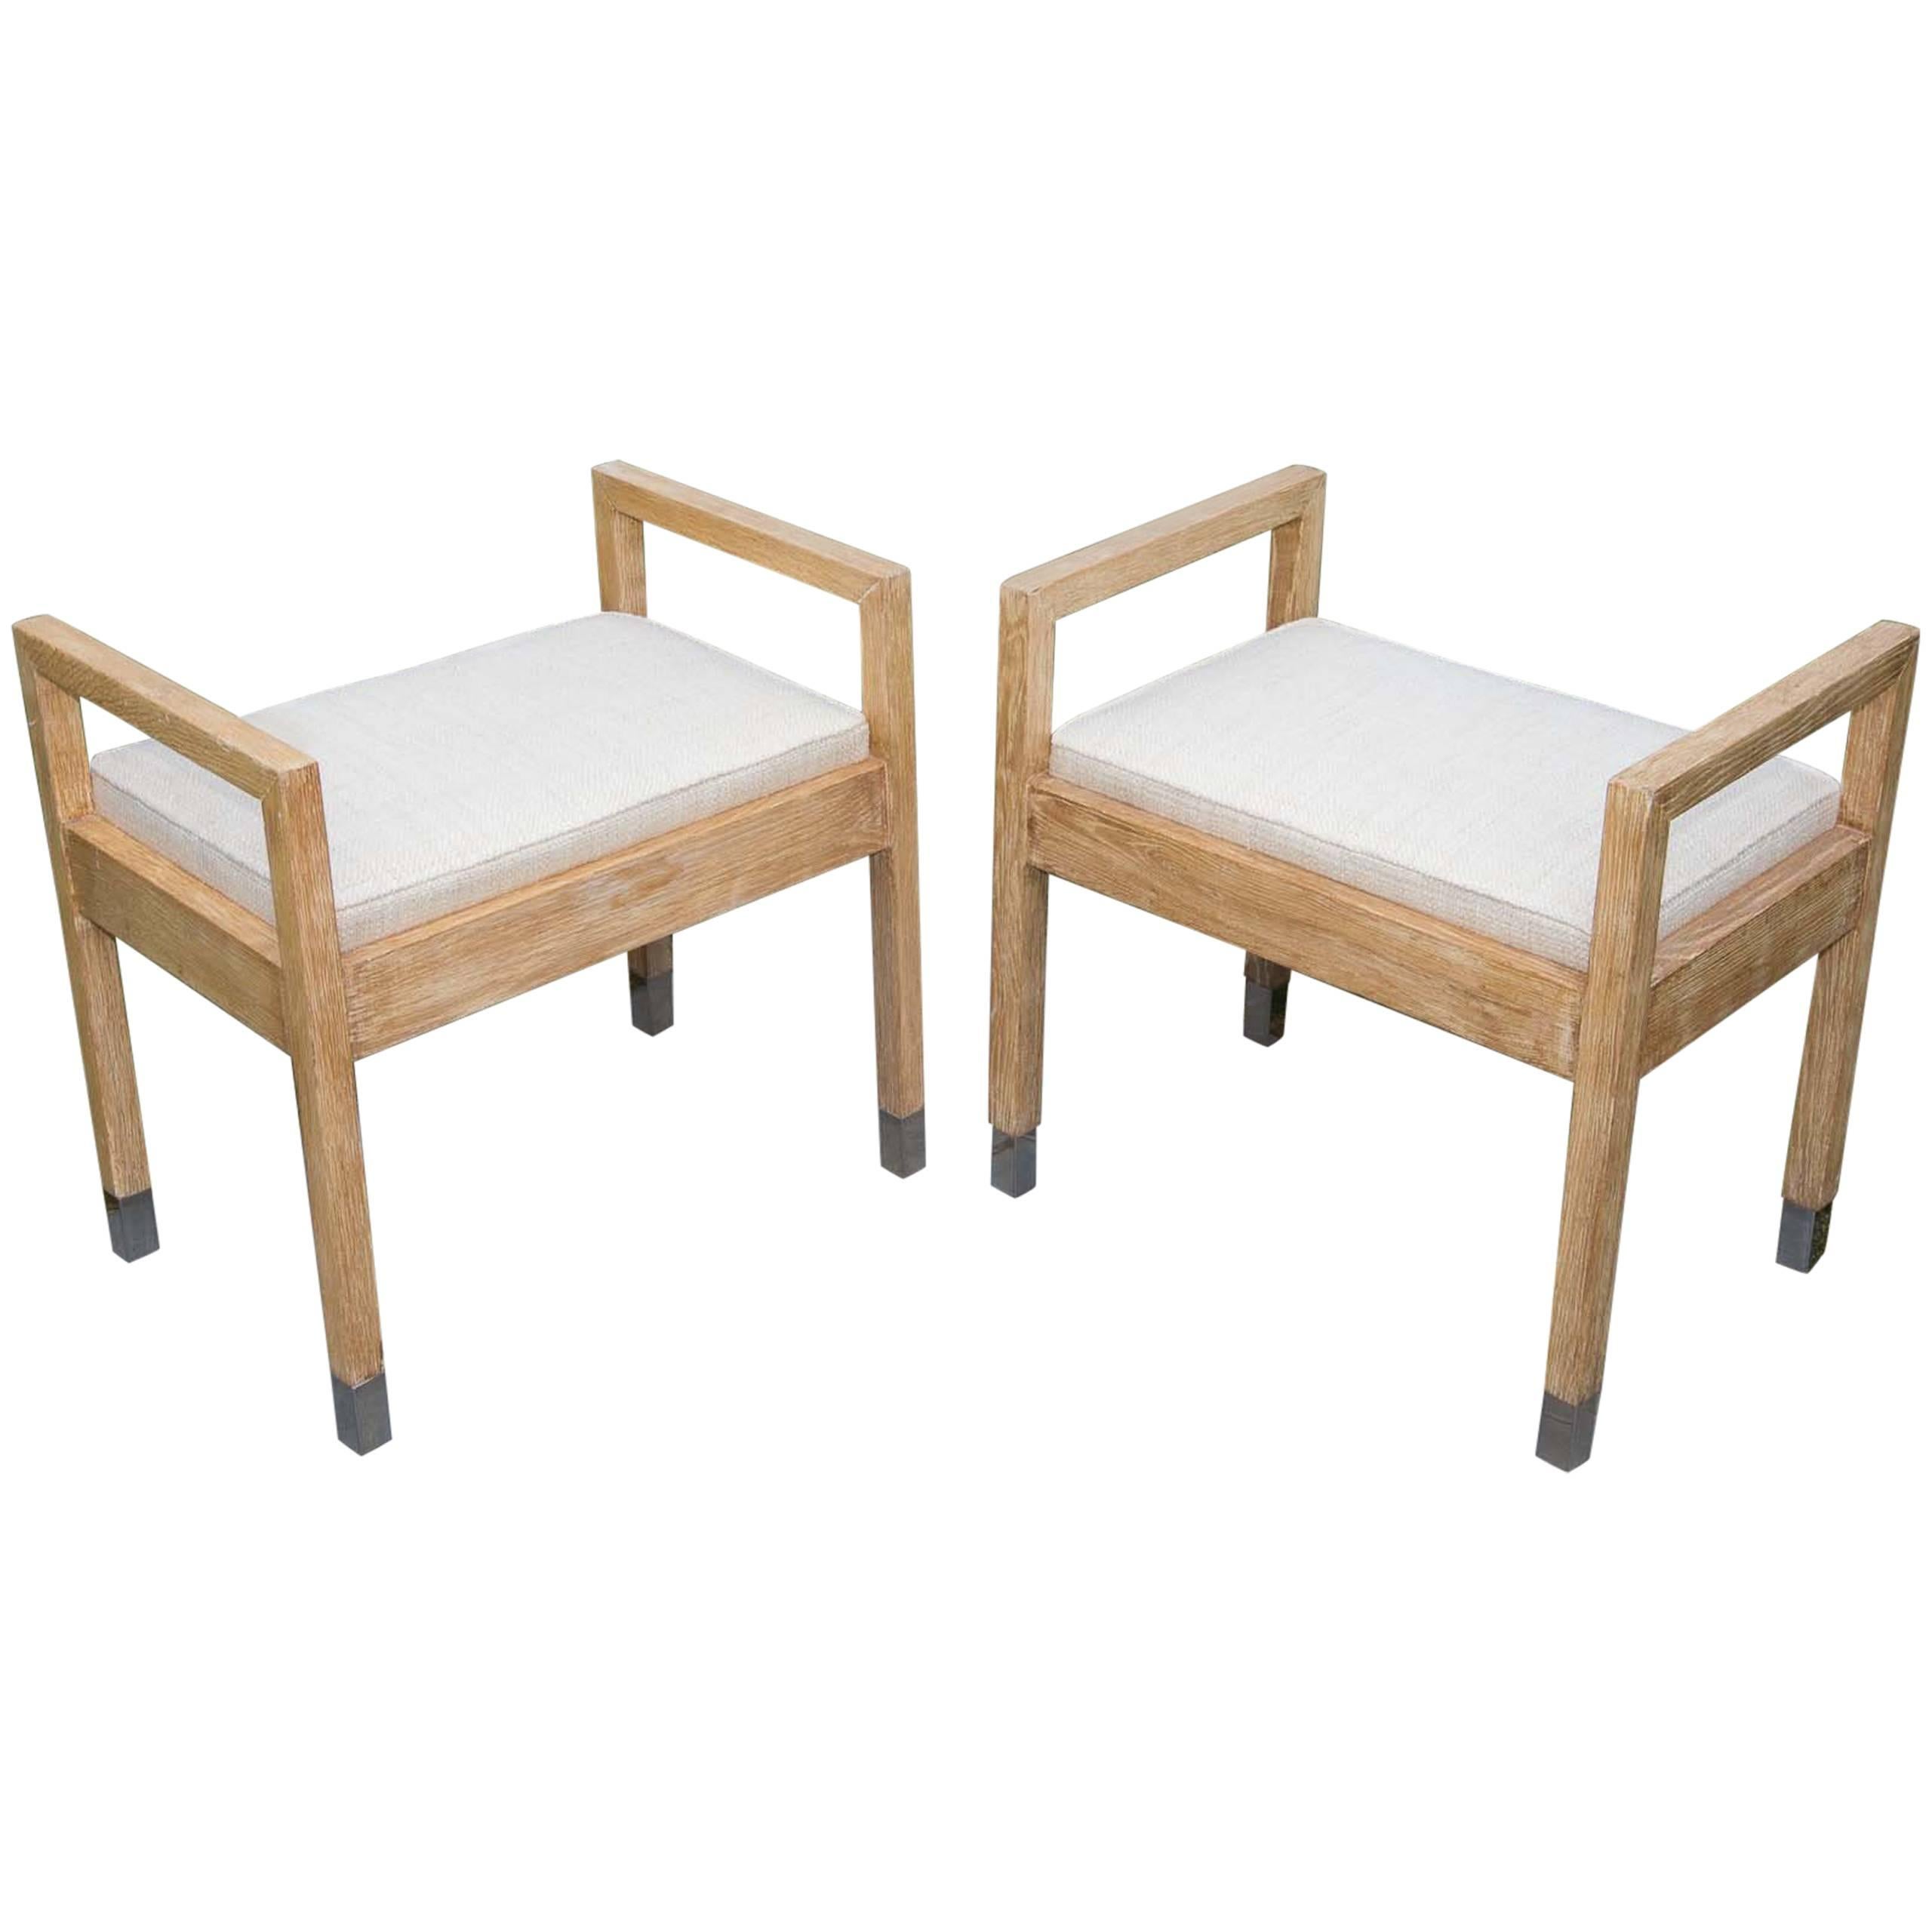 Pair of Upholstered Wood Benches with Chrome Tip Legs